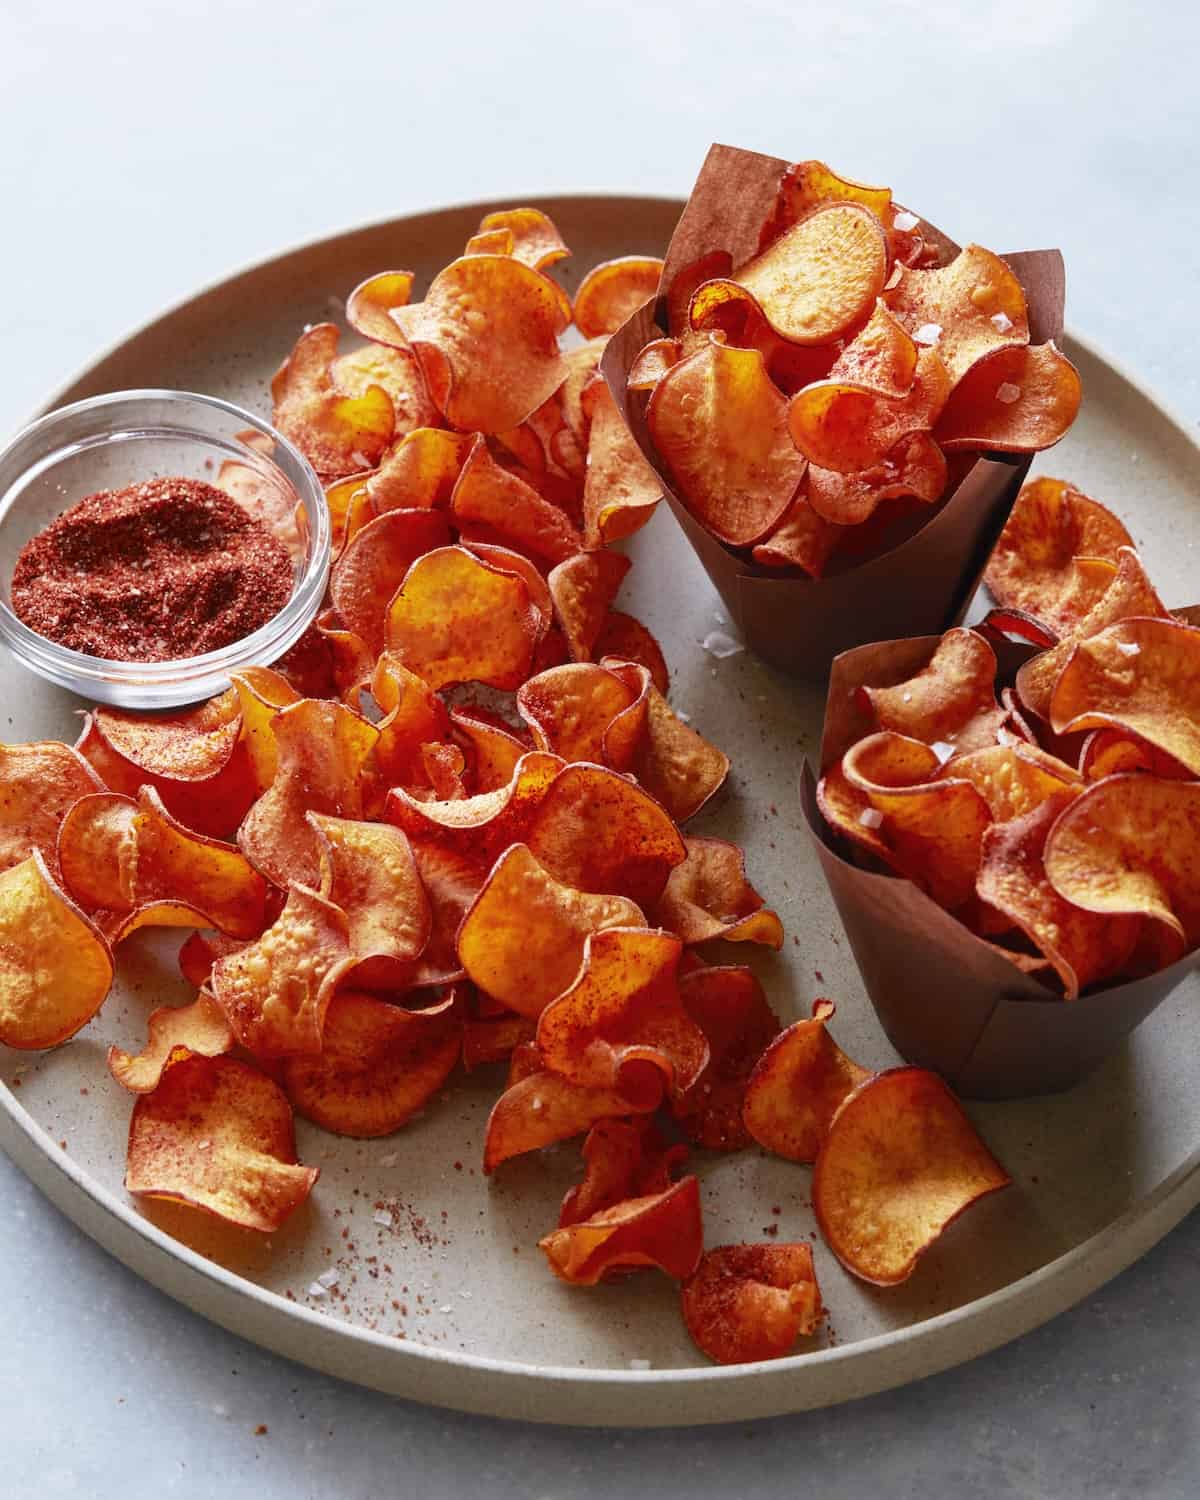 A round platter with BBQ sweet potato chips on the plate, along with two brown paper bowls filled with more of the chips, along with a small glass bowl of BBQ spice mix.